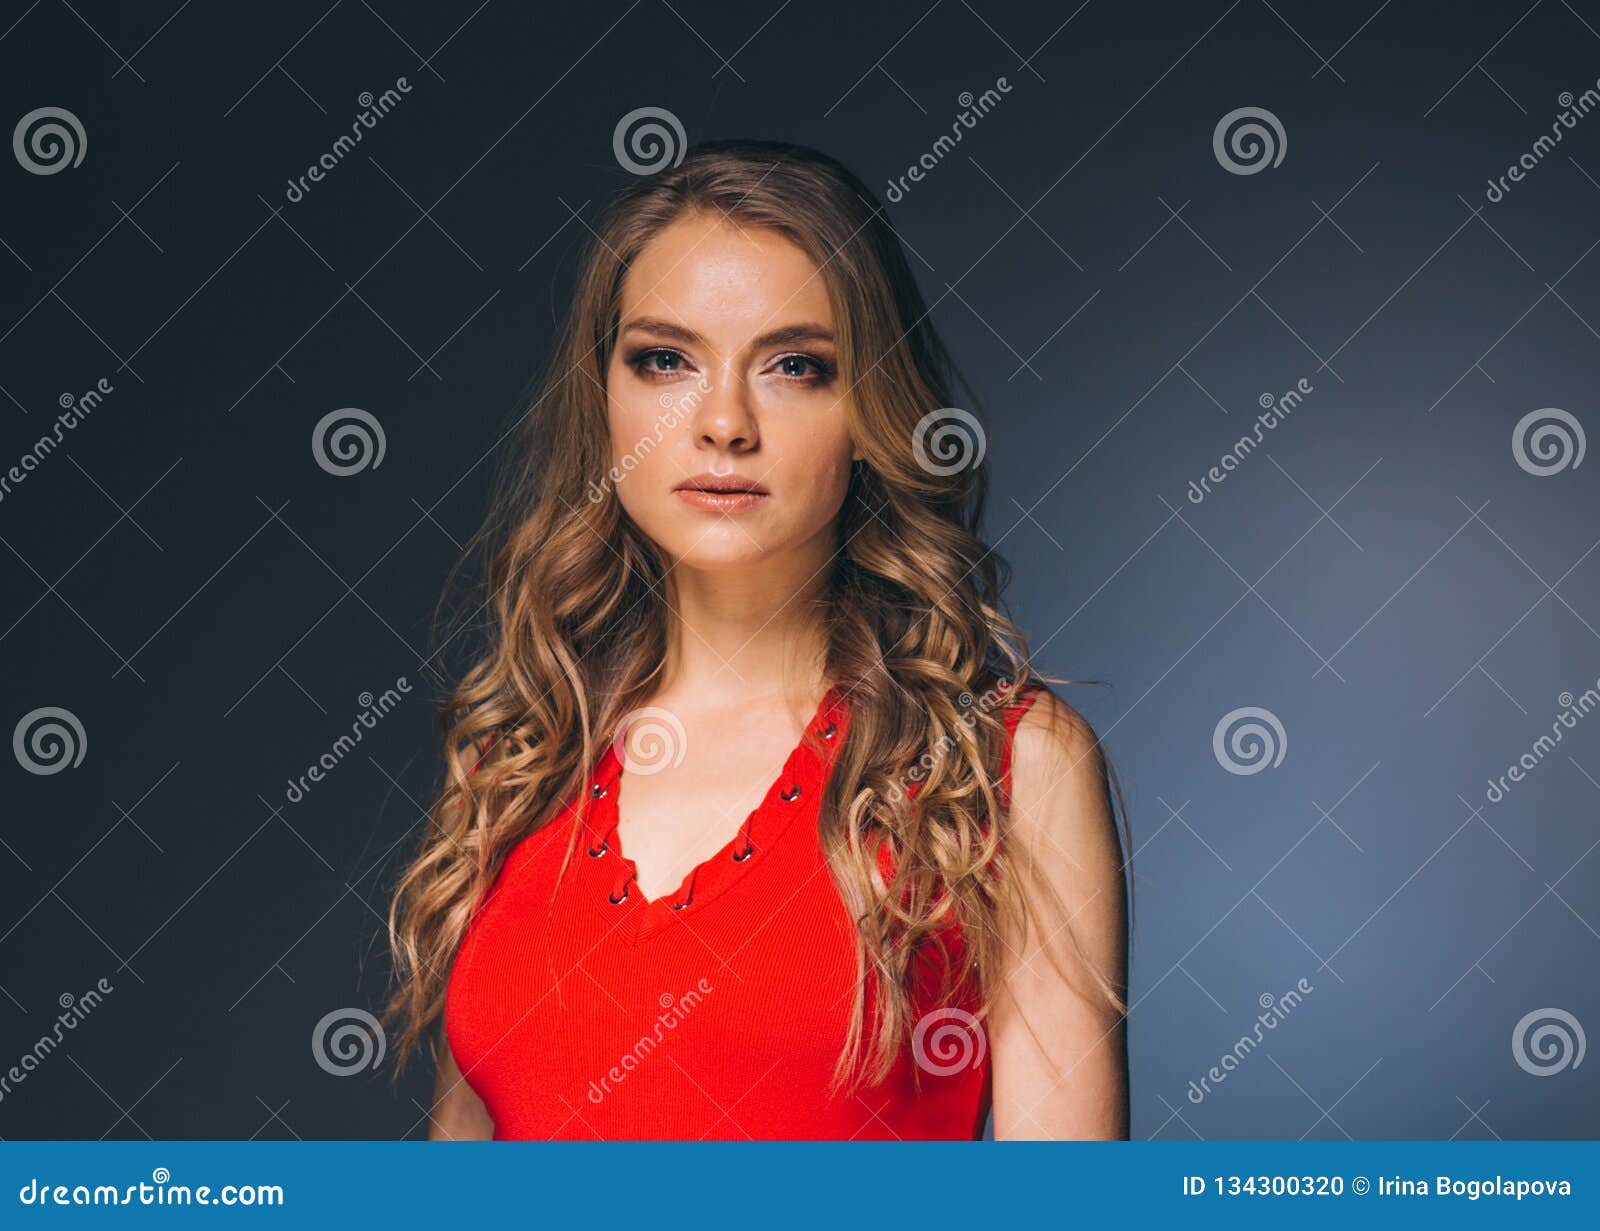 Woman in Red Dress with Long Blonde Hair Stock Photo - Image of ...